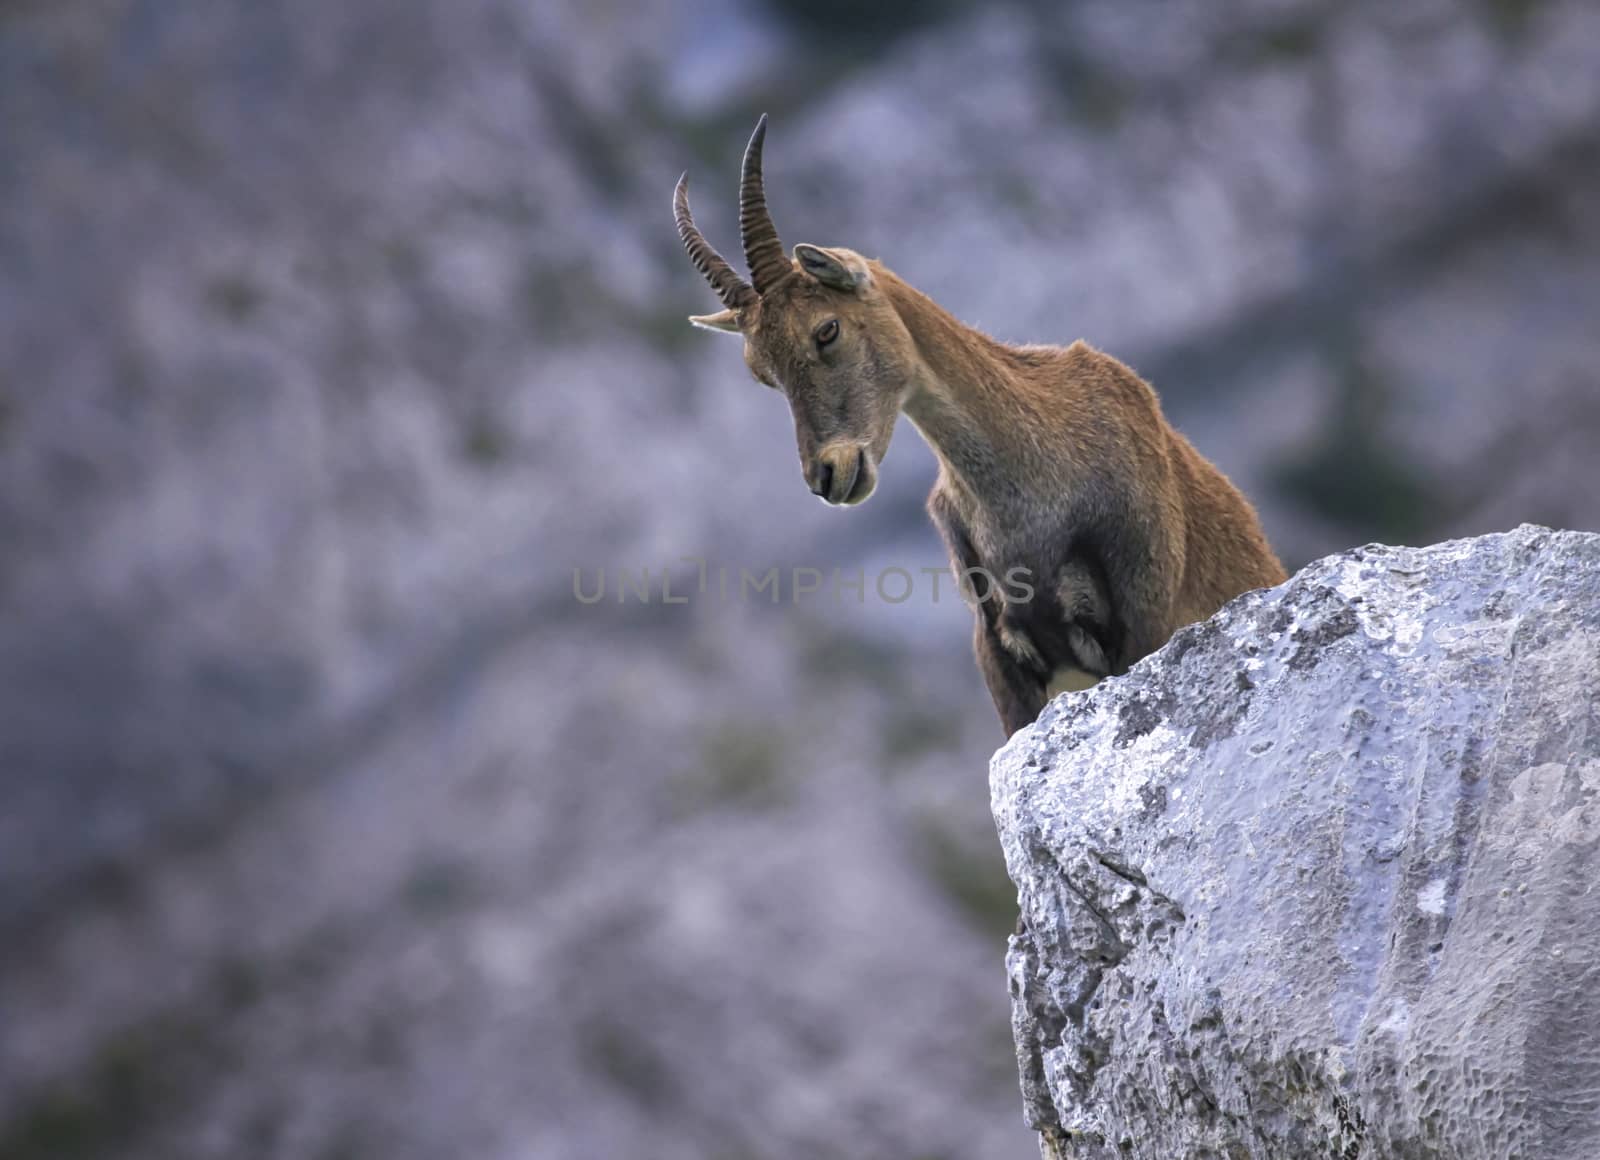 Female wild alpine ibex, capra ibex, or steinbock standing upon a rock in Alps mountain, France